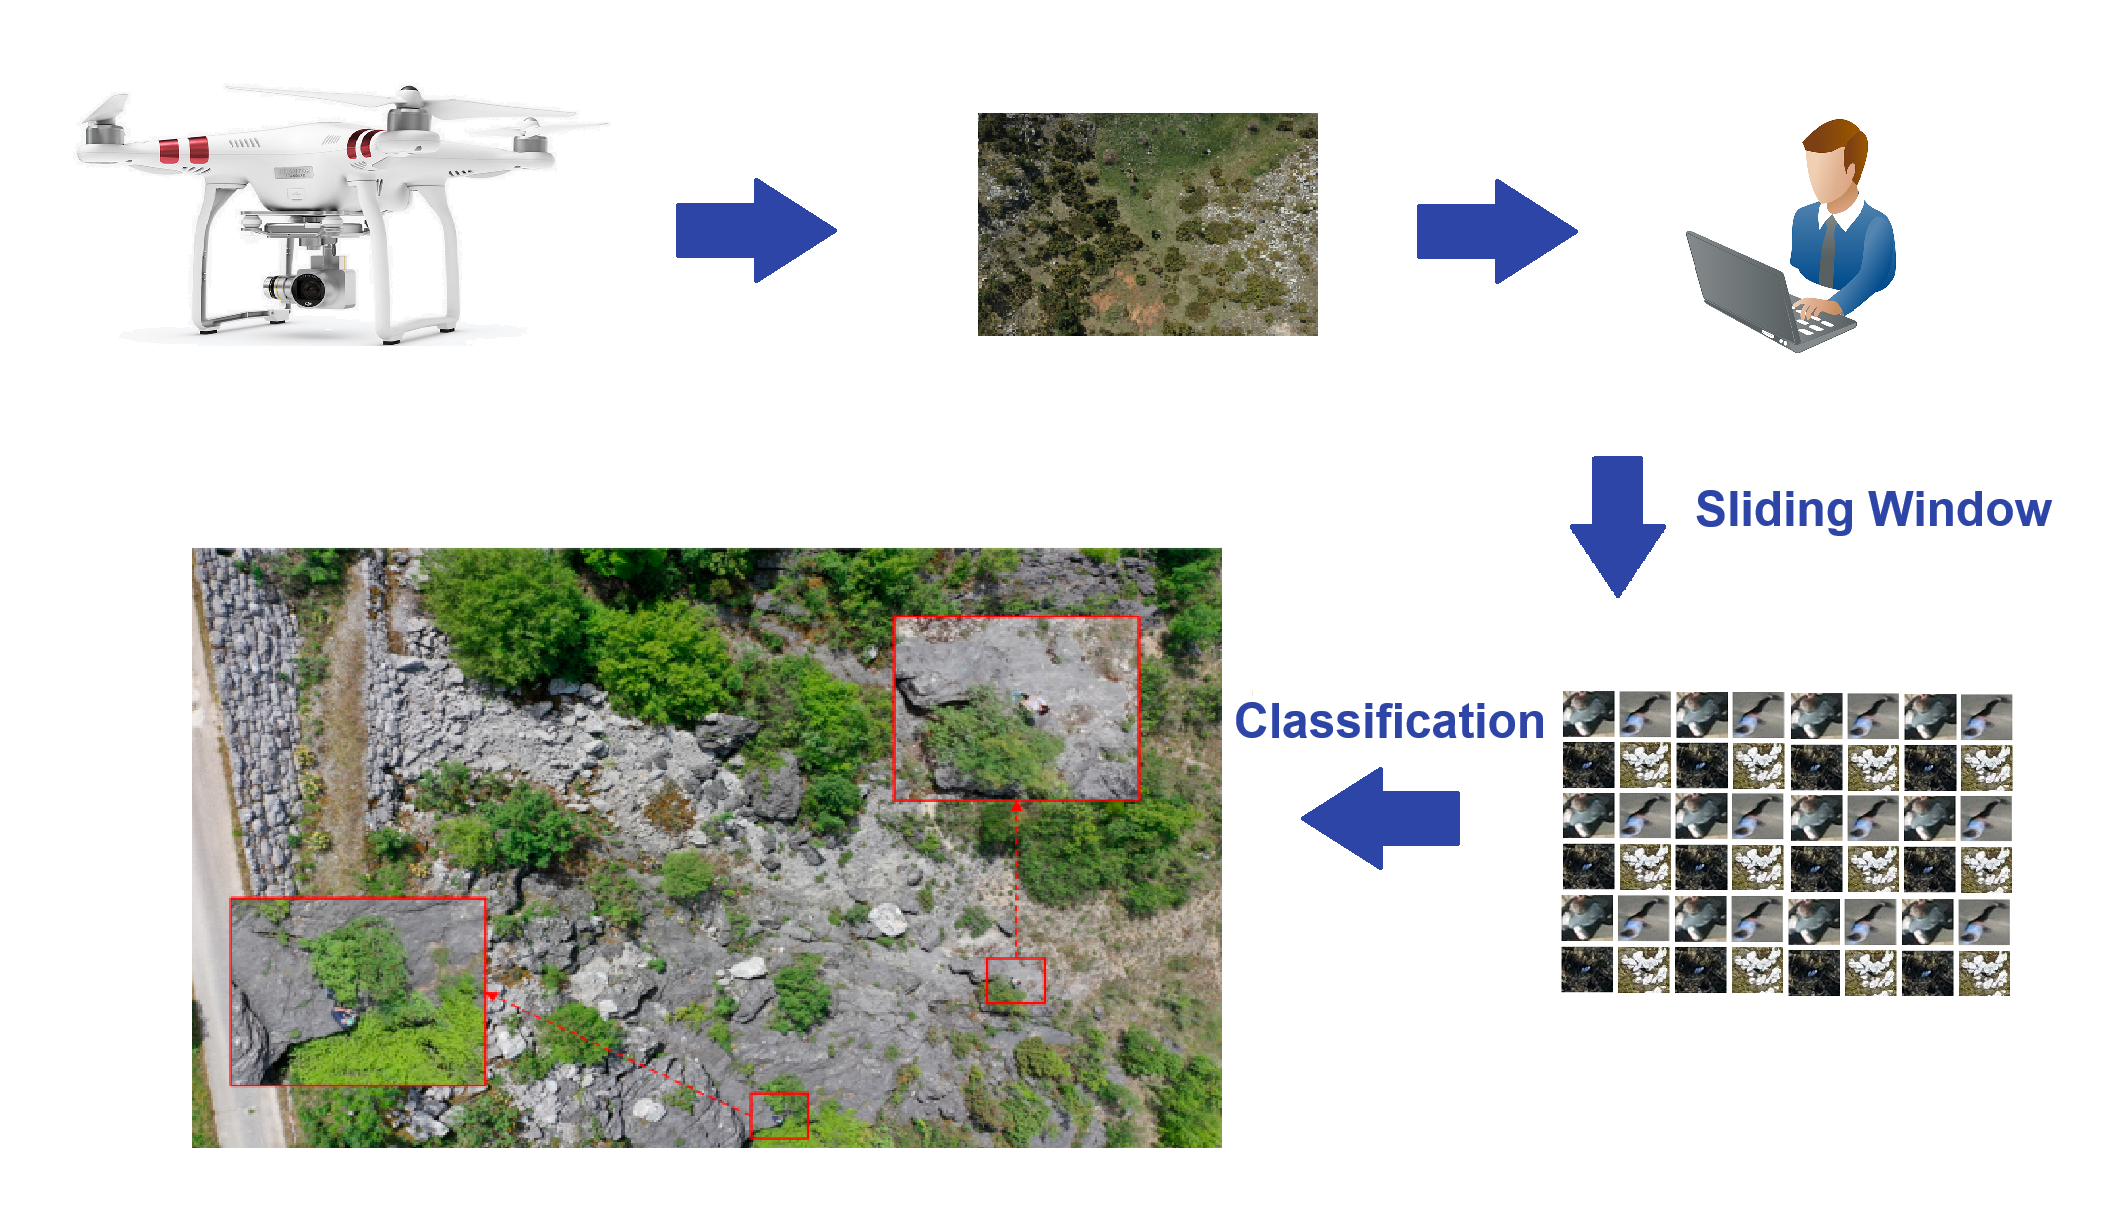 Analysis of Computer Vision Application in The Context of SAR Missions